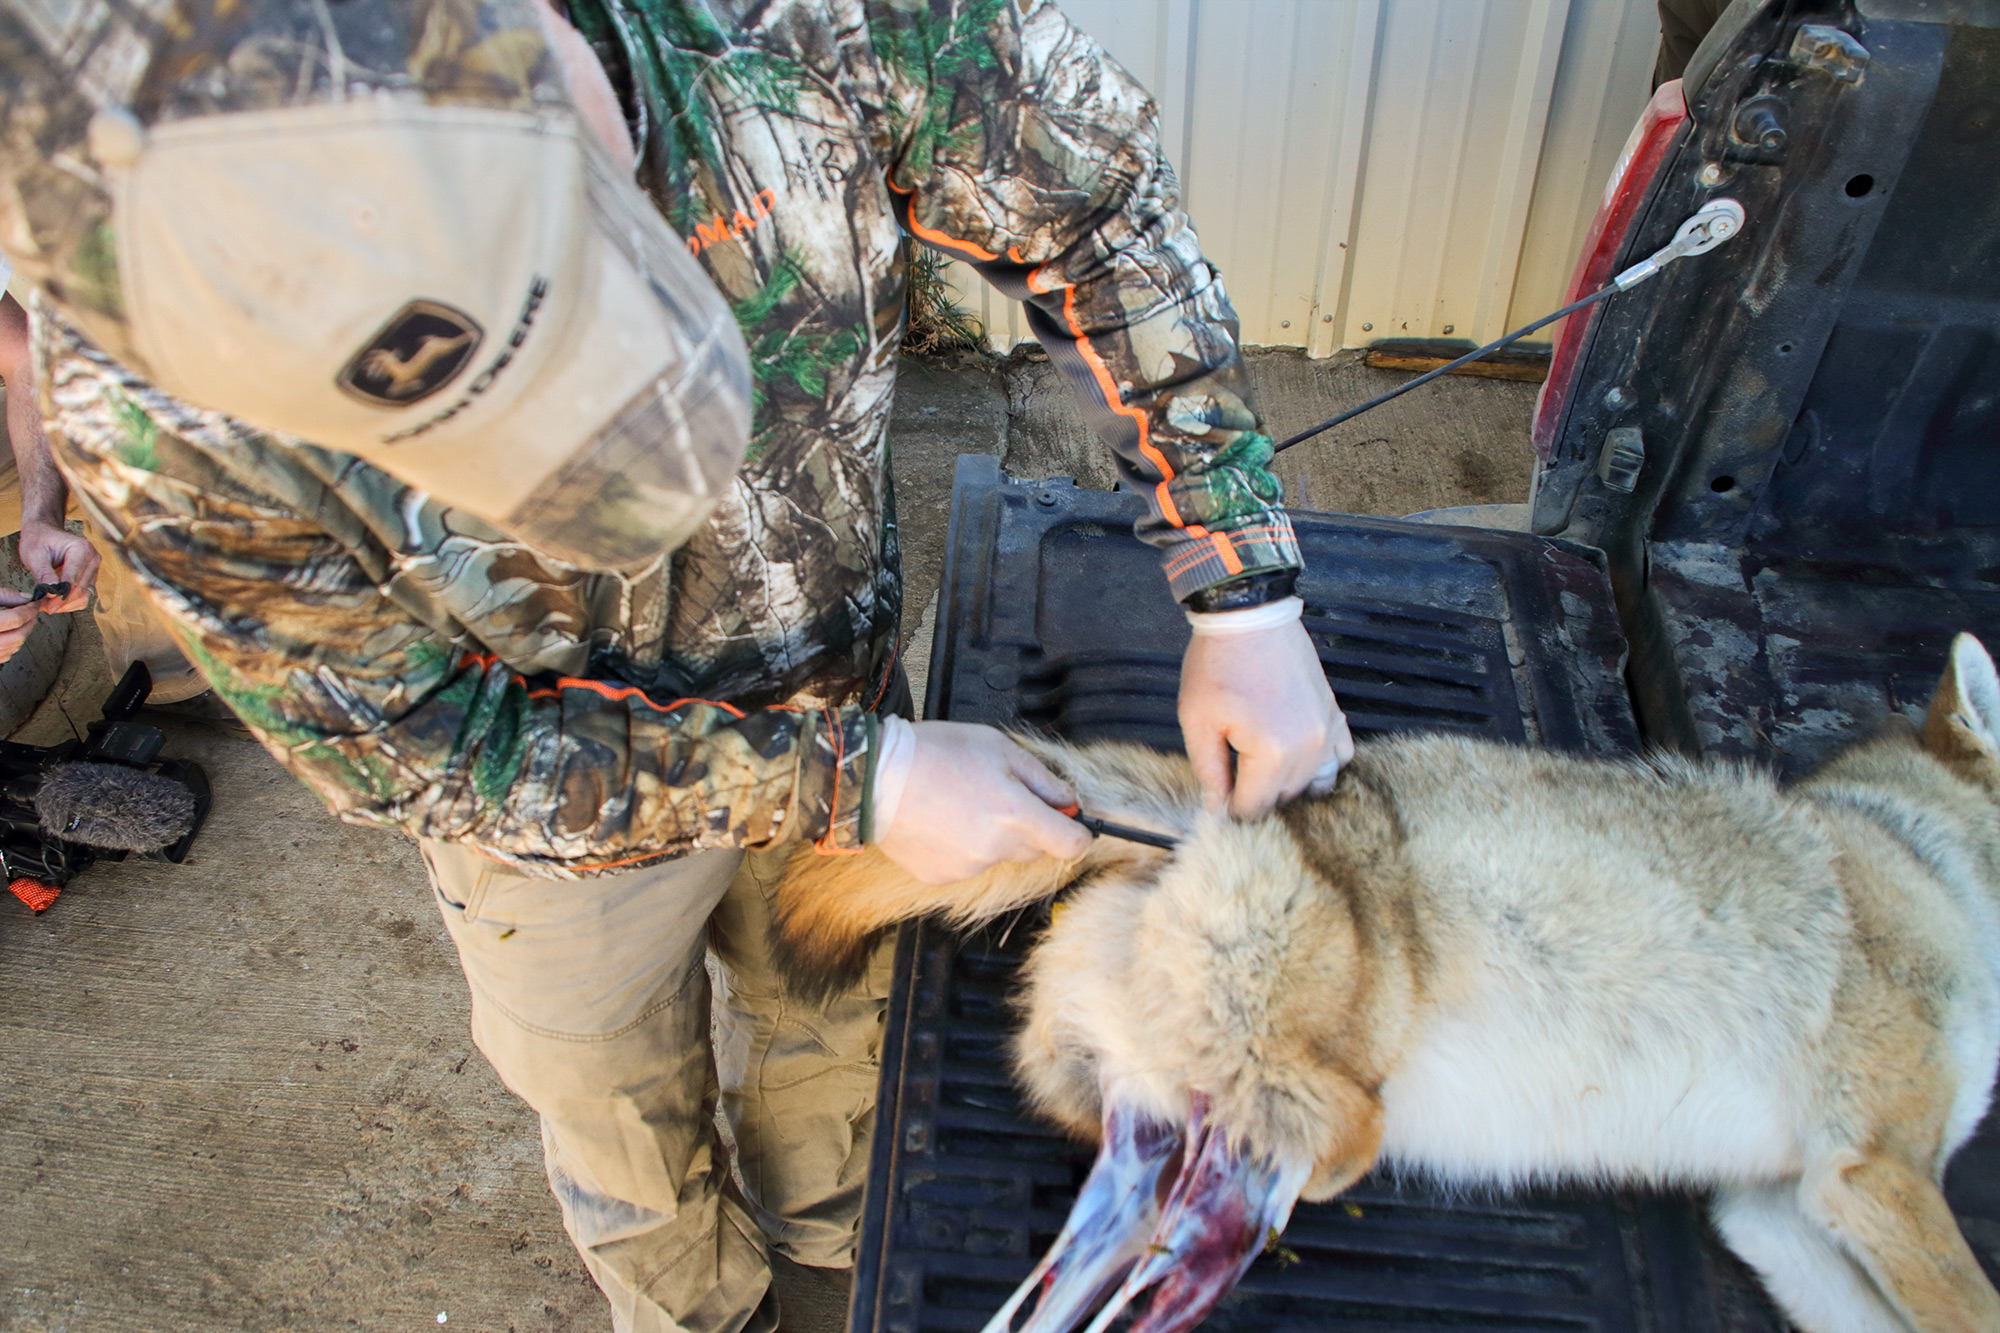 Skinning a coyote after predator hunting